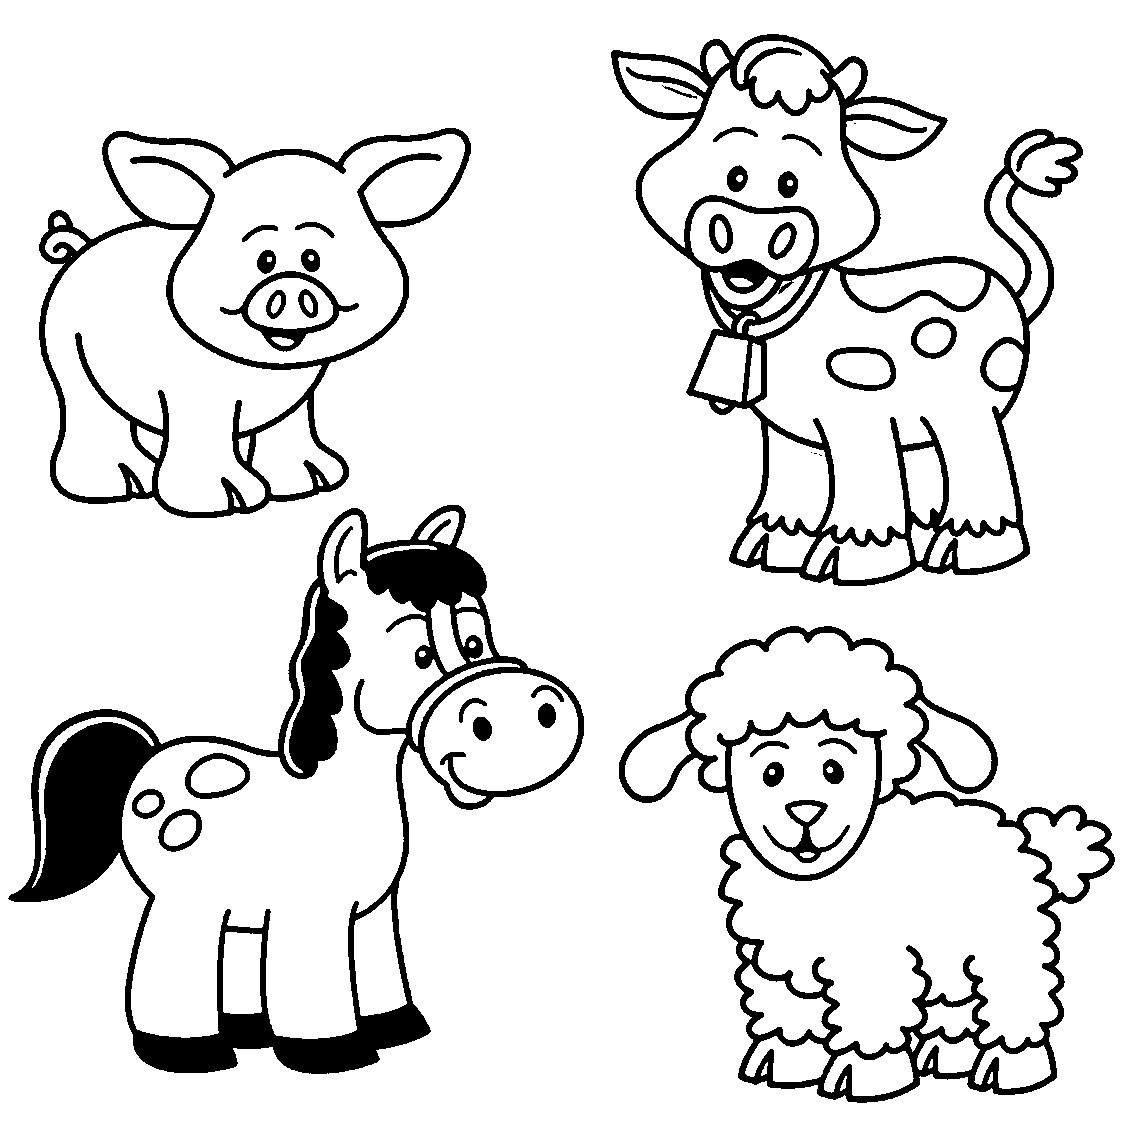 Coloring Pages For Kids Animals
 Pin on Colorings